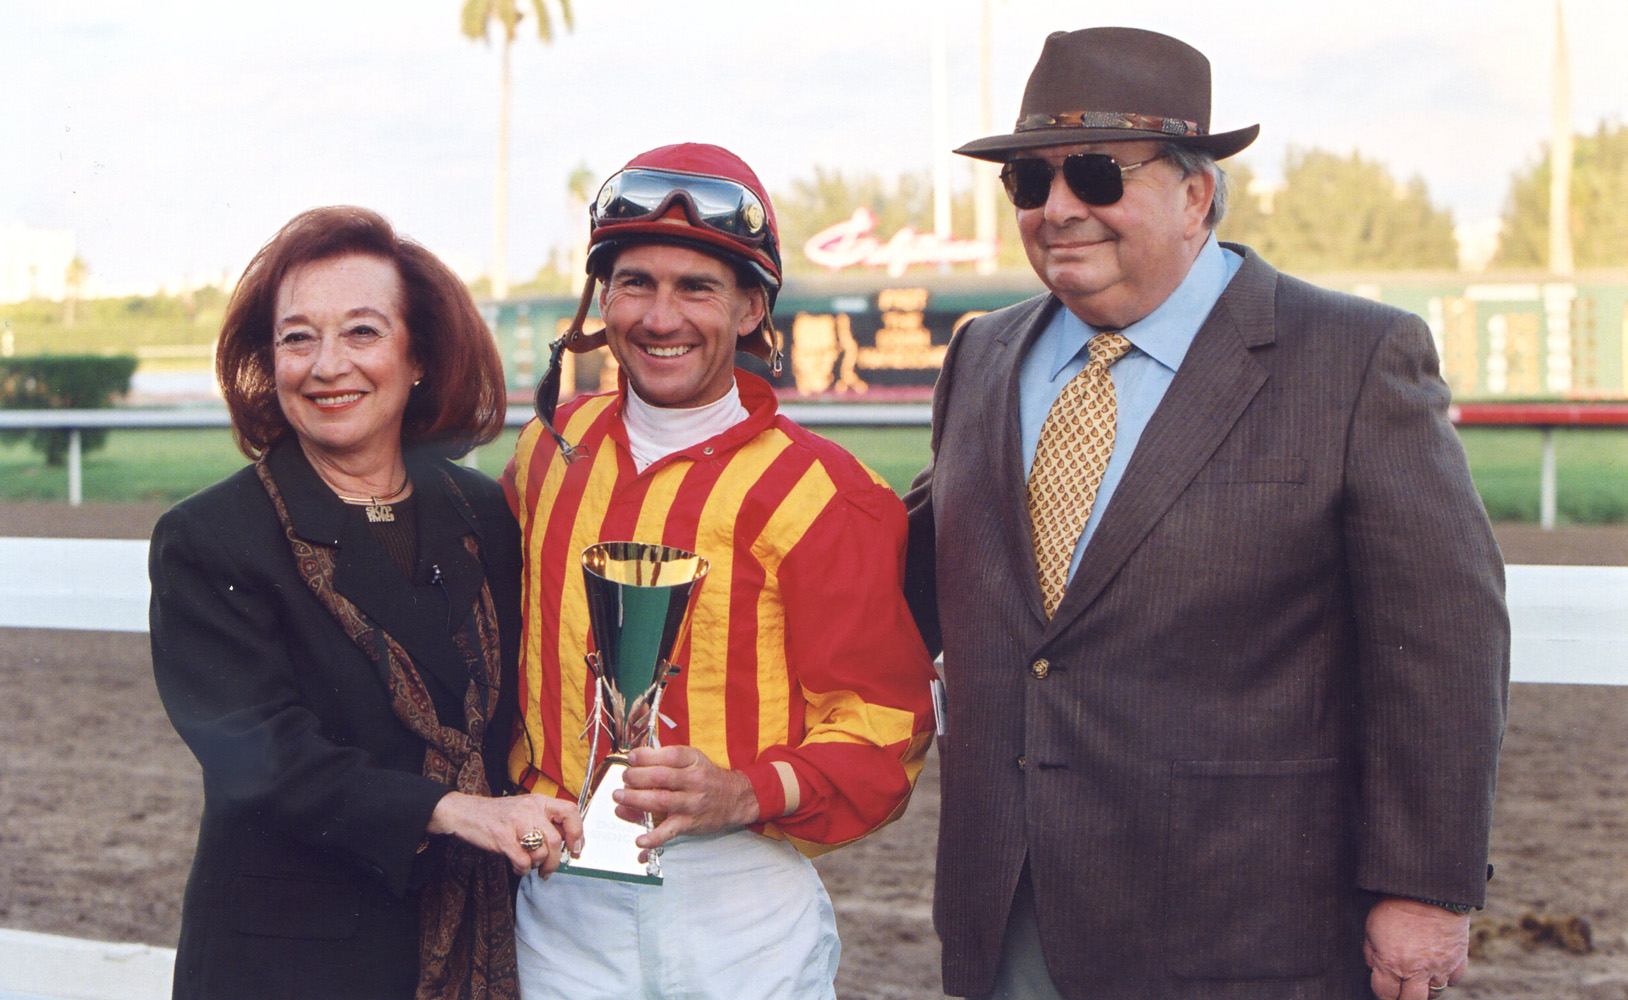 Sonny and Caroyln Hine with Jerry Bailey at the trophy presentation at Gulfstream Park in February 1998 (Barbara D. Livingston/Museum Collection)